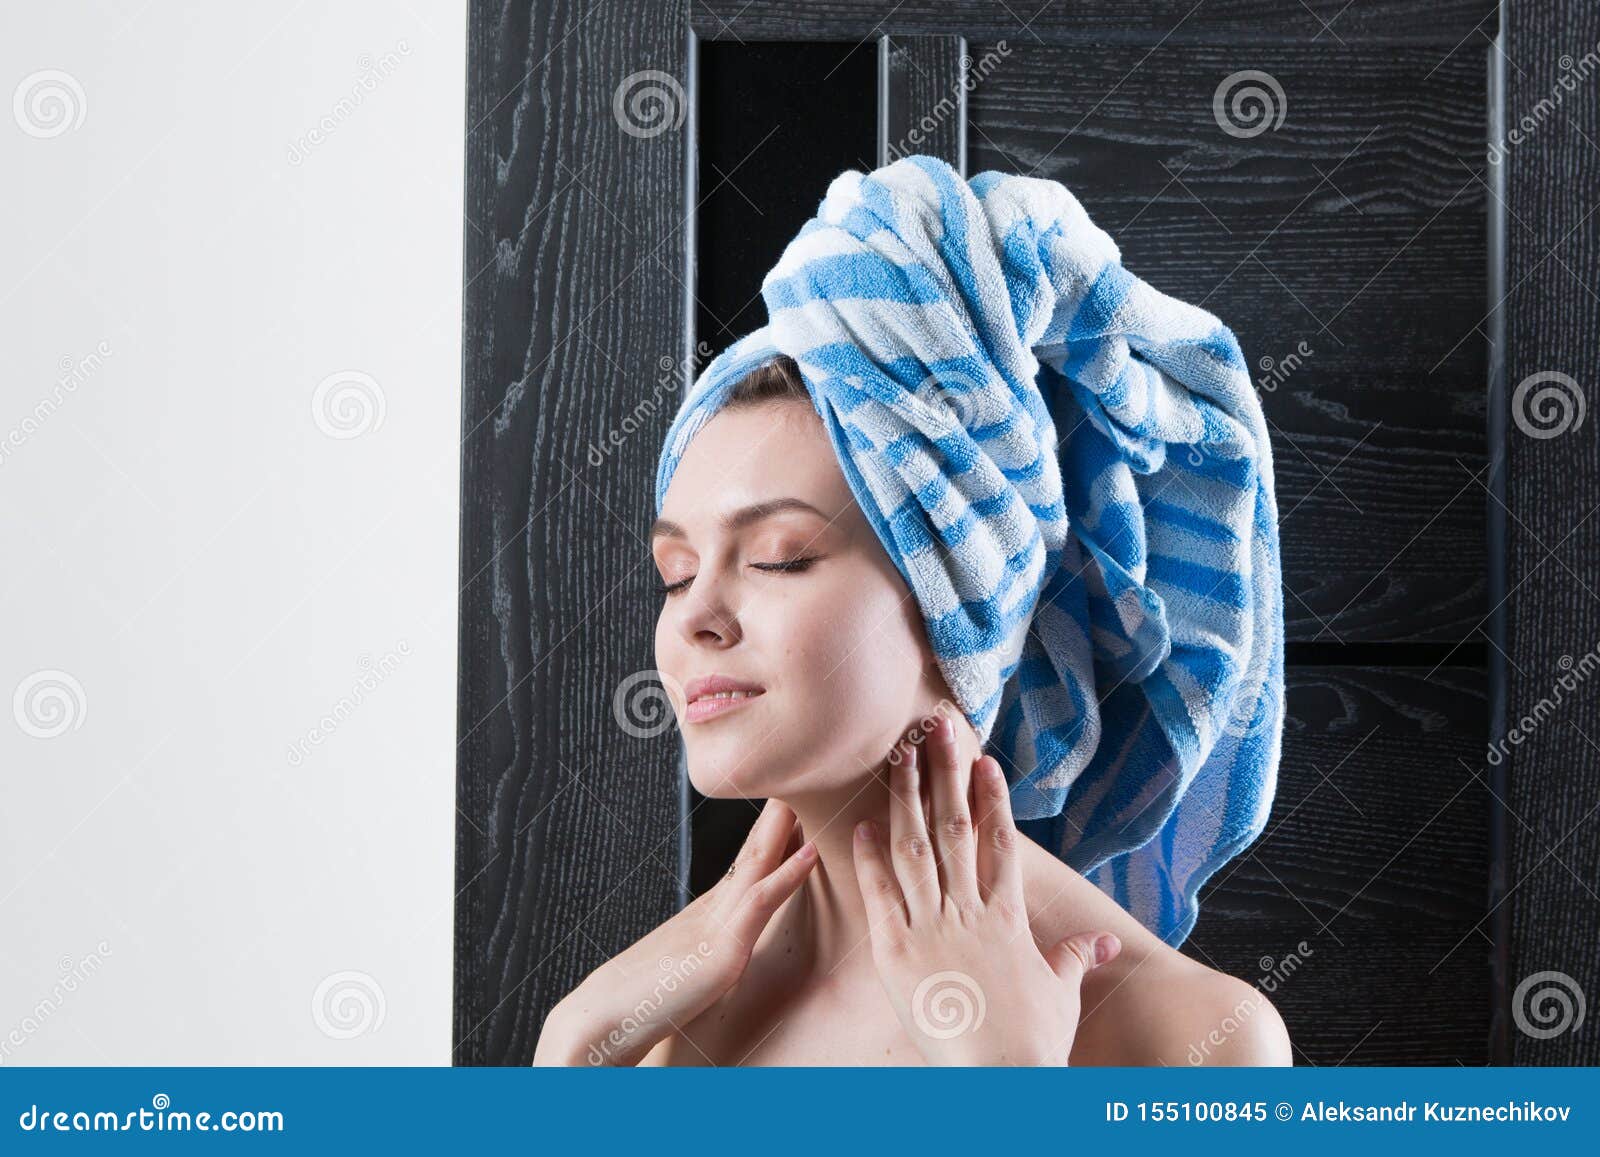 Beautiful Girl After A Shower With A Towel On Her Head